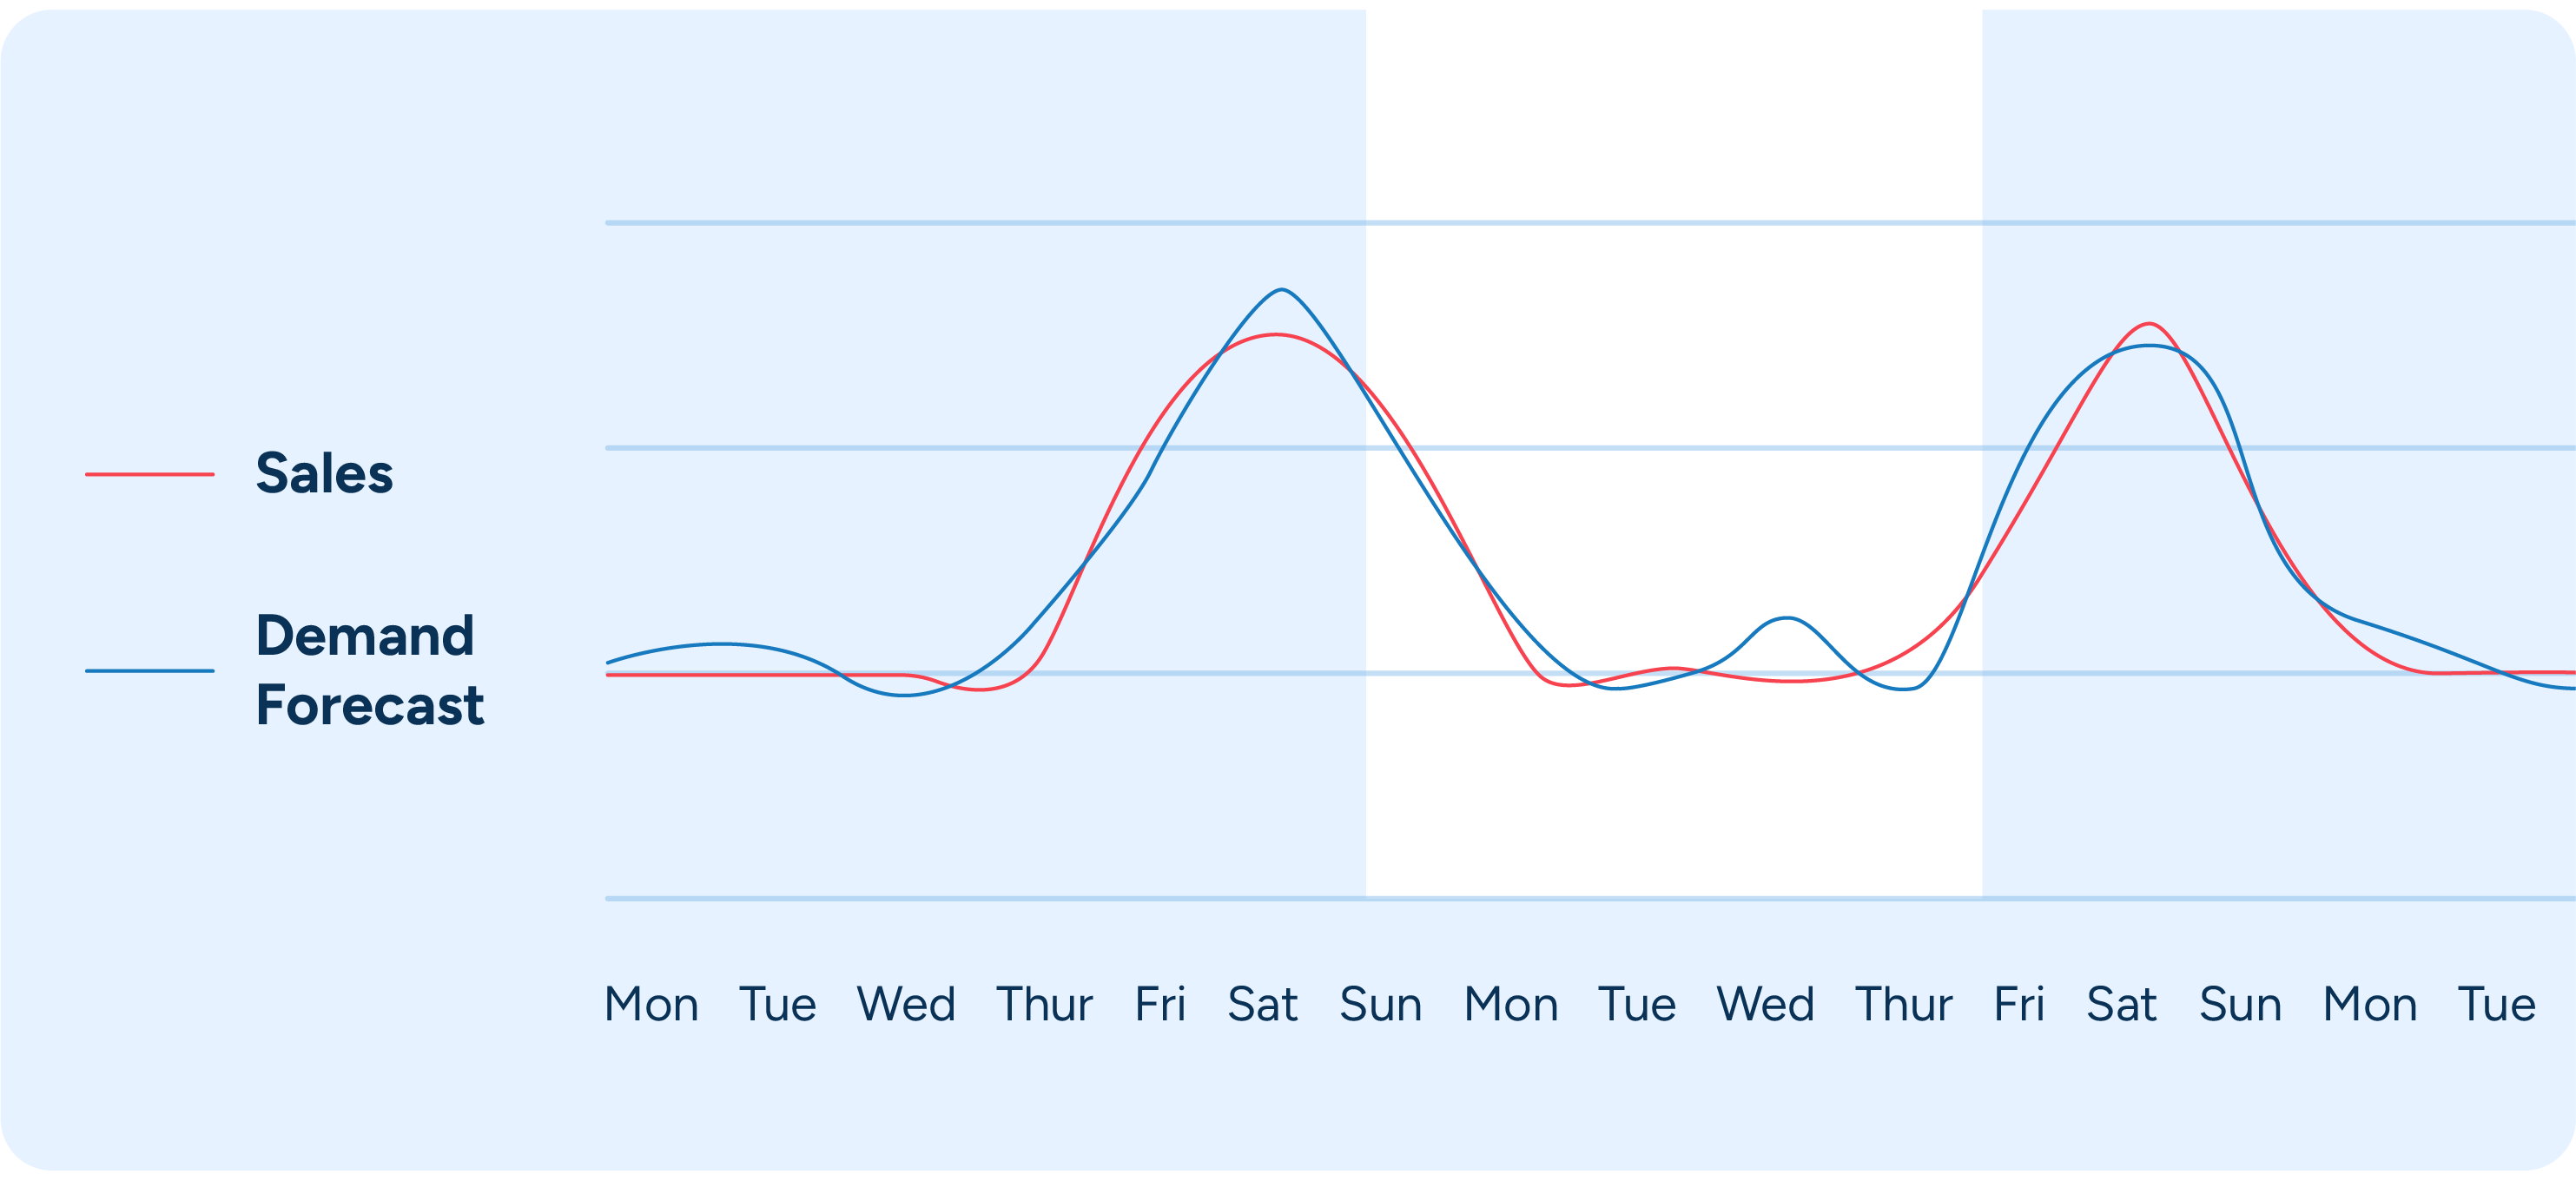 A chart showing a product's weekday demand shifts.